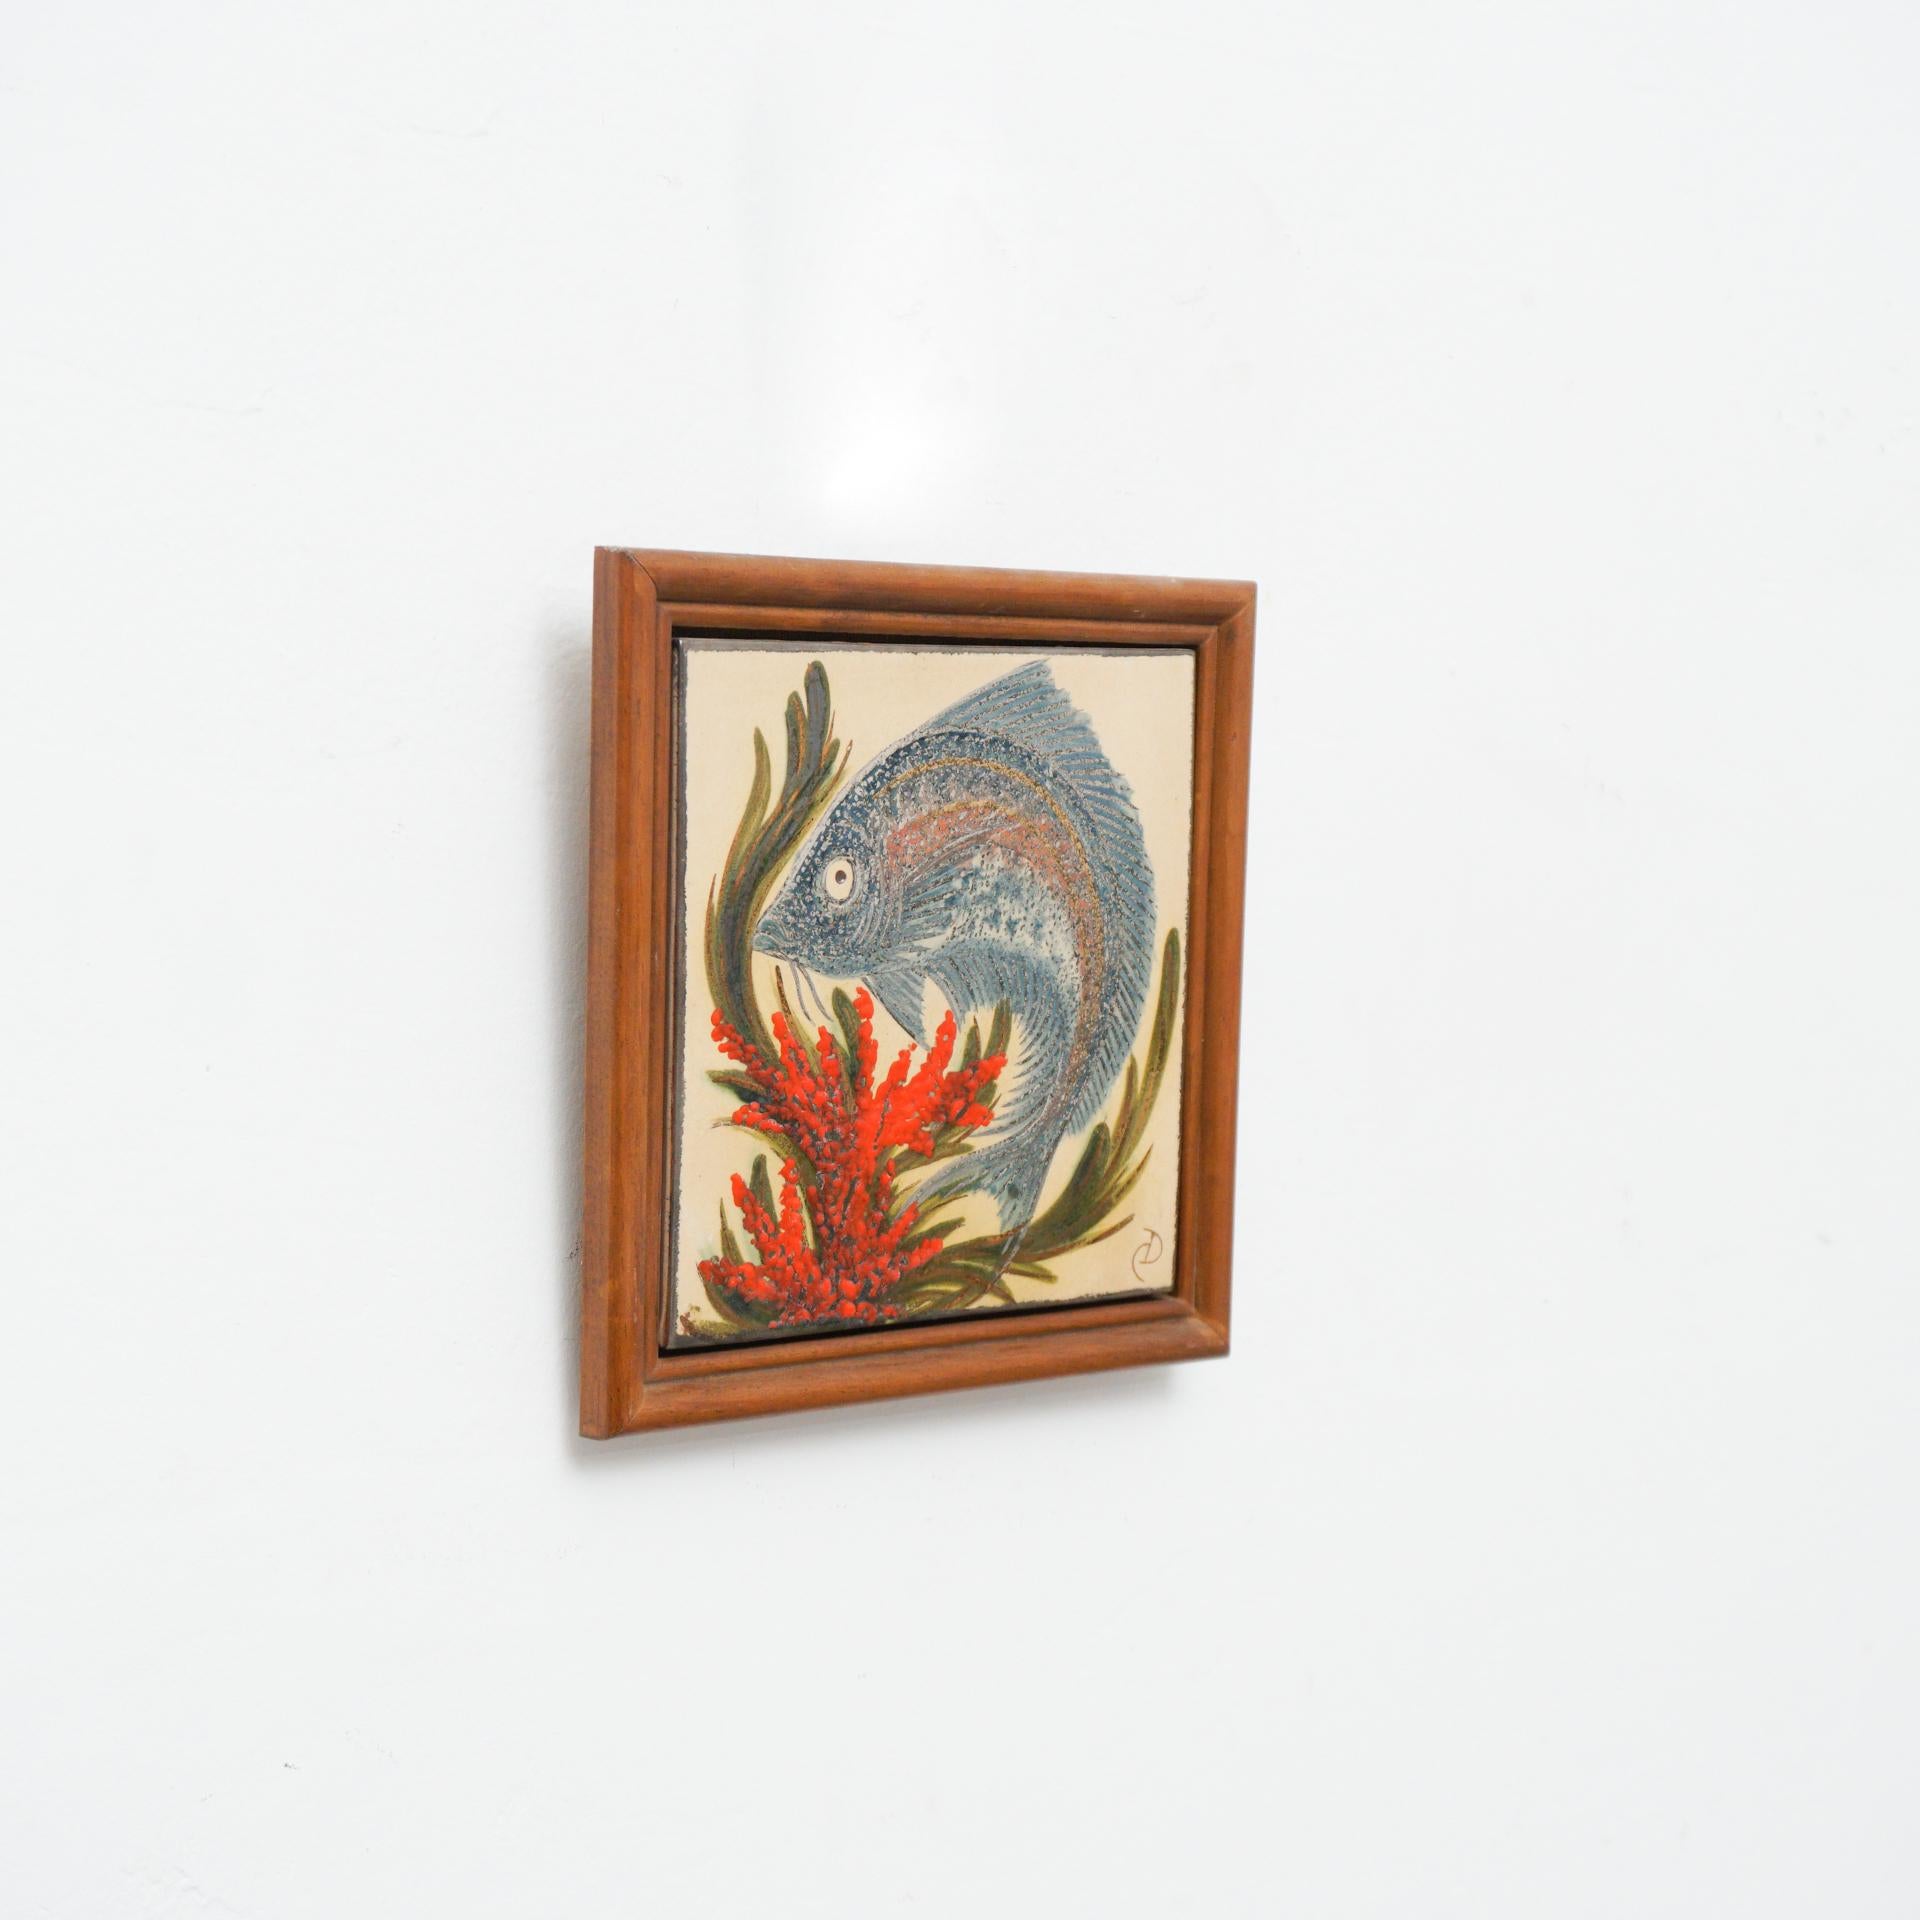 Mid Century Modern Ceramic Hand Painted Artwork of a fish by Catalan artist Diaz Costa, circa 1960.
Framed.

In original condition, with minor wear consistent of age and use, preserving a beautiul patina.